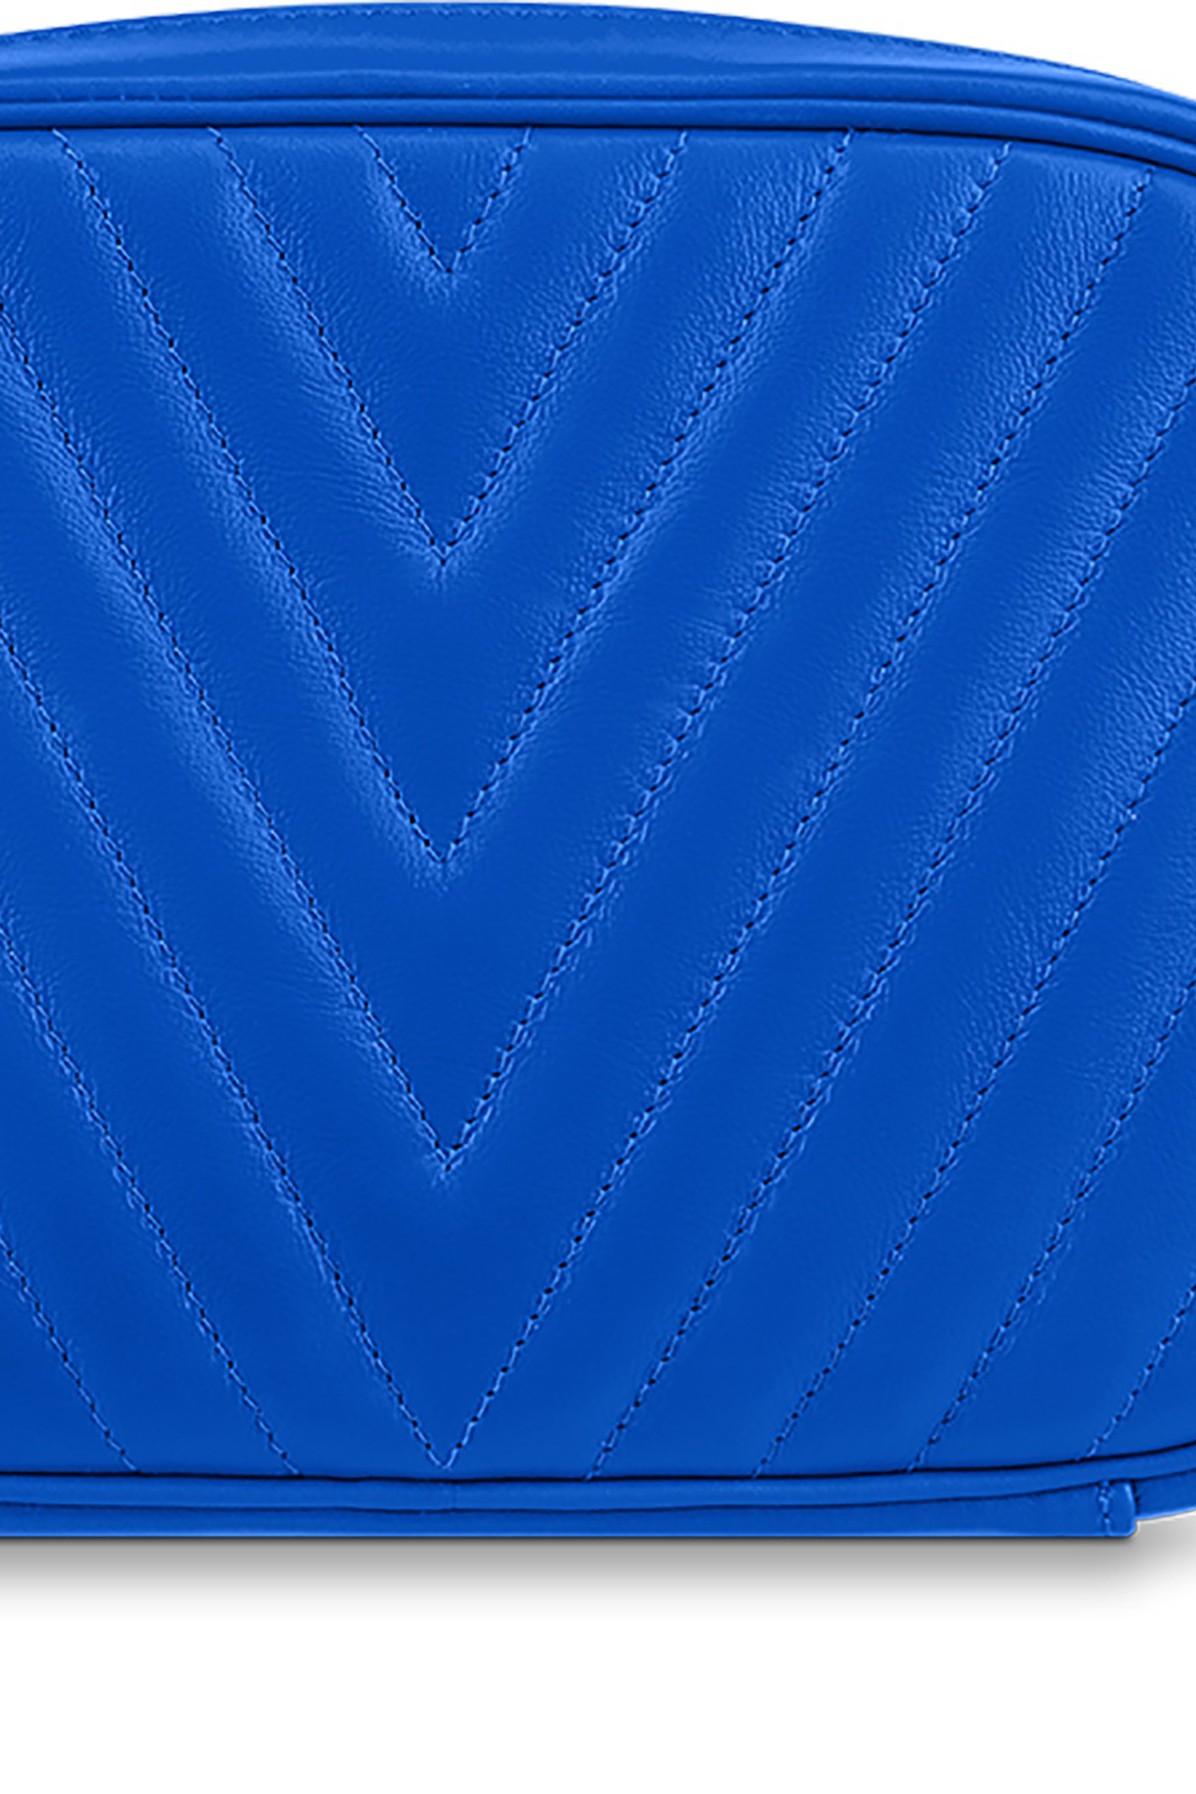 LOUIS VUITTON *New Wave* Camera Shoulder Bag Quilted BLUE Leather M53901  Purse